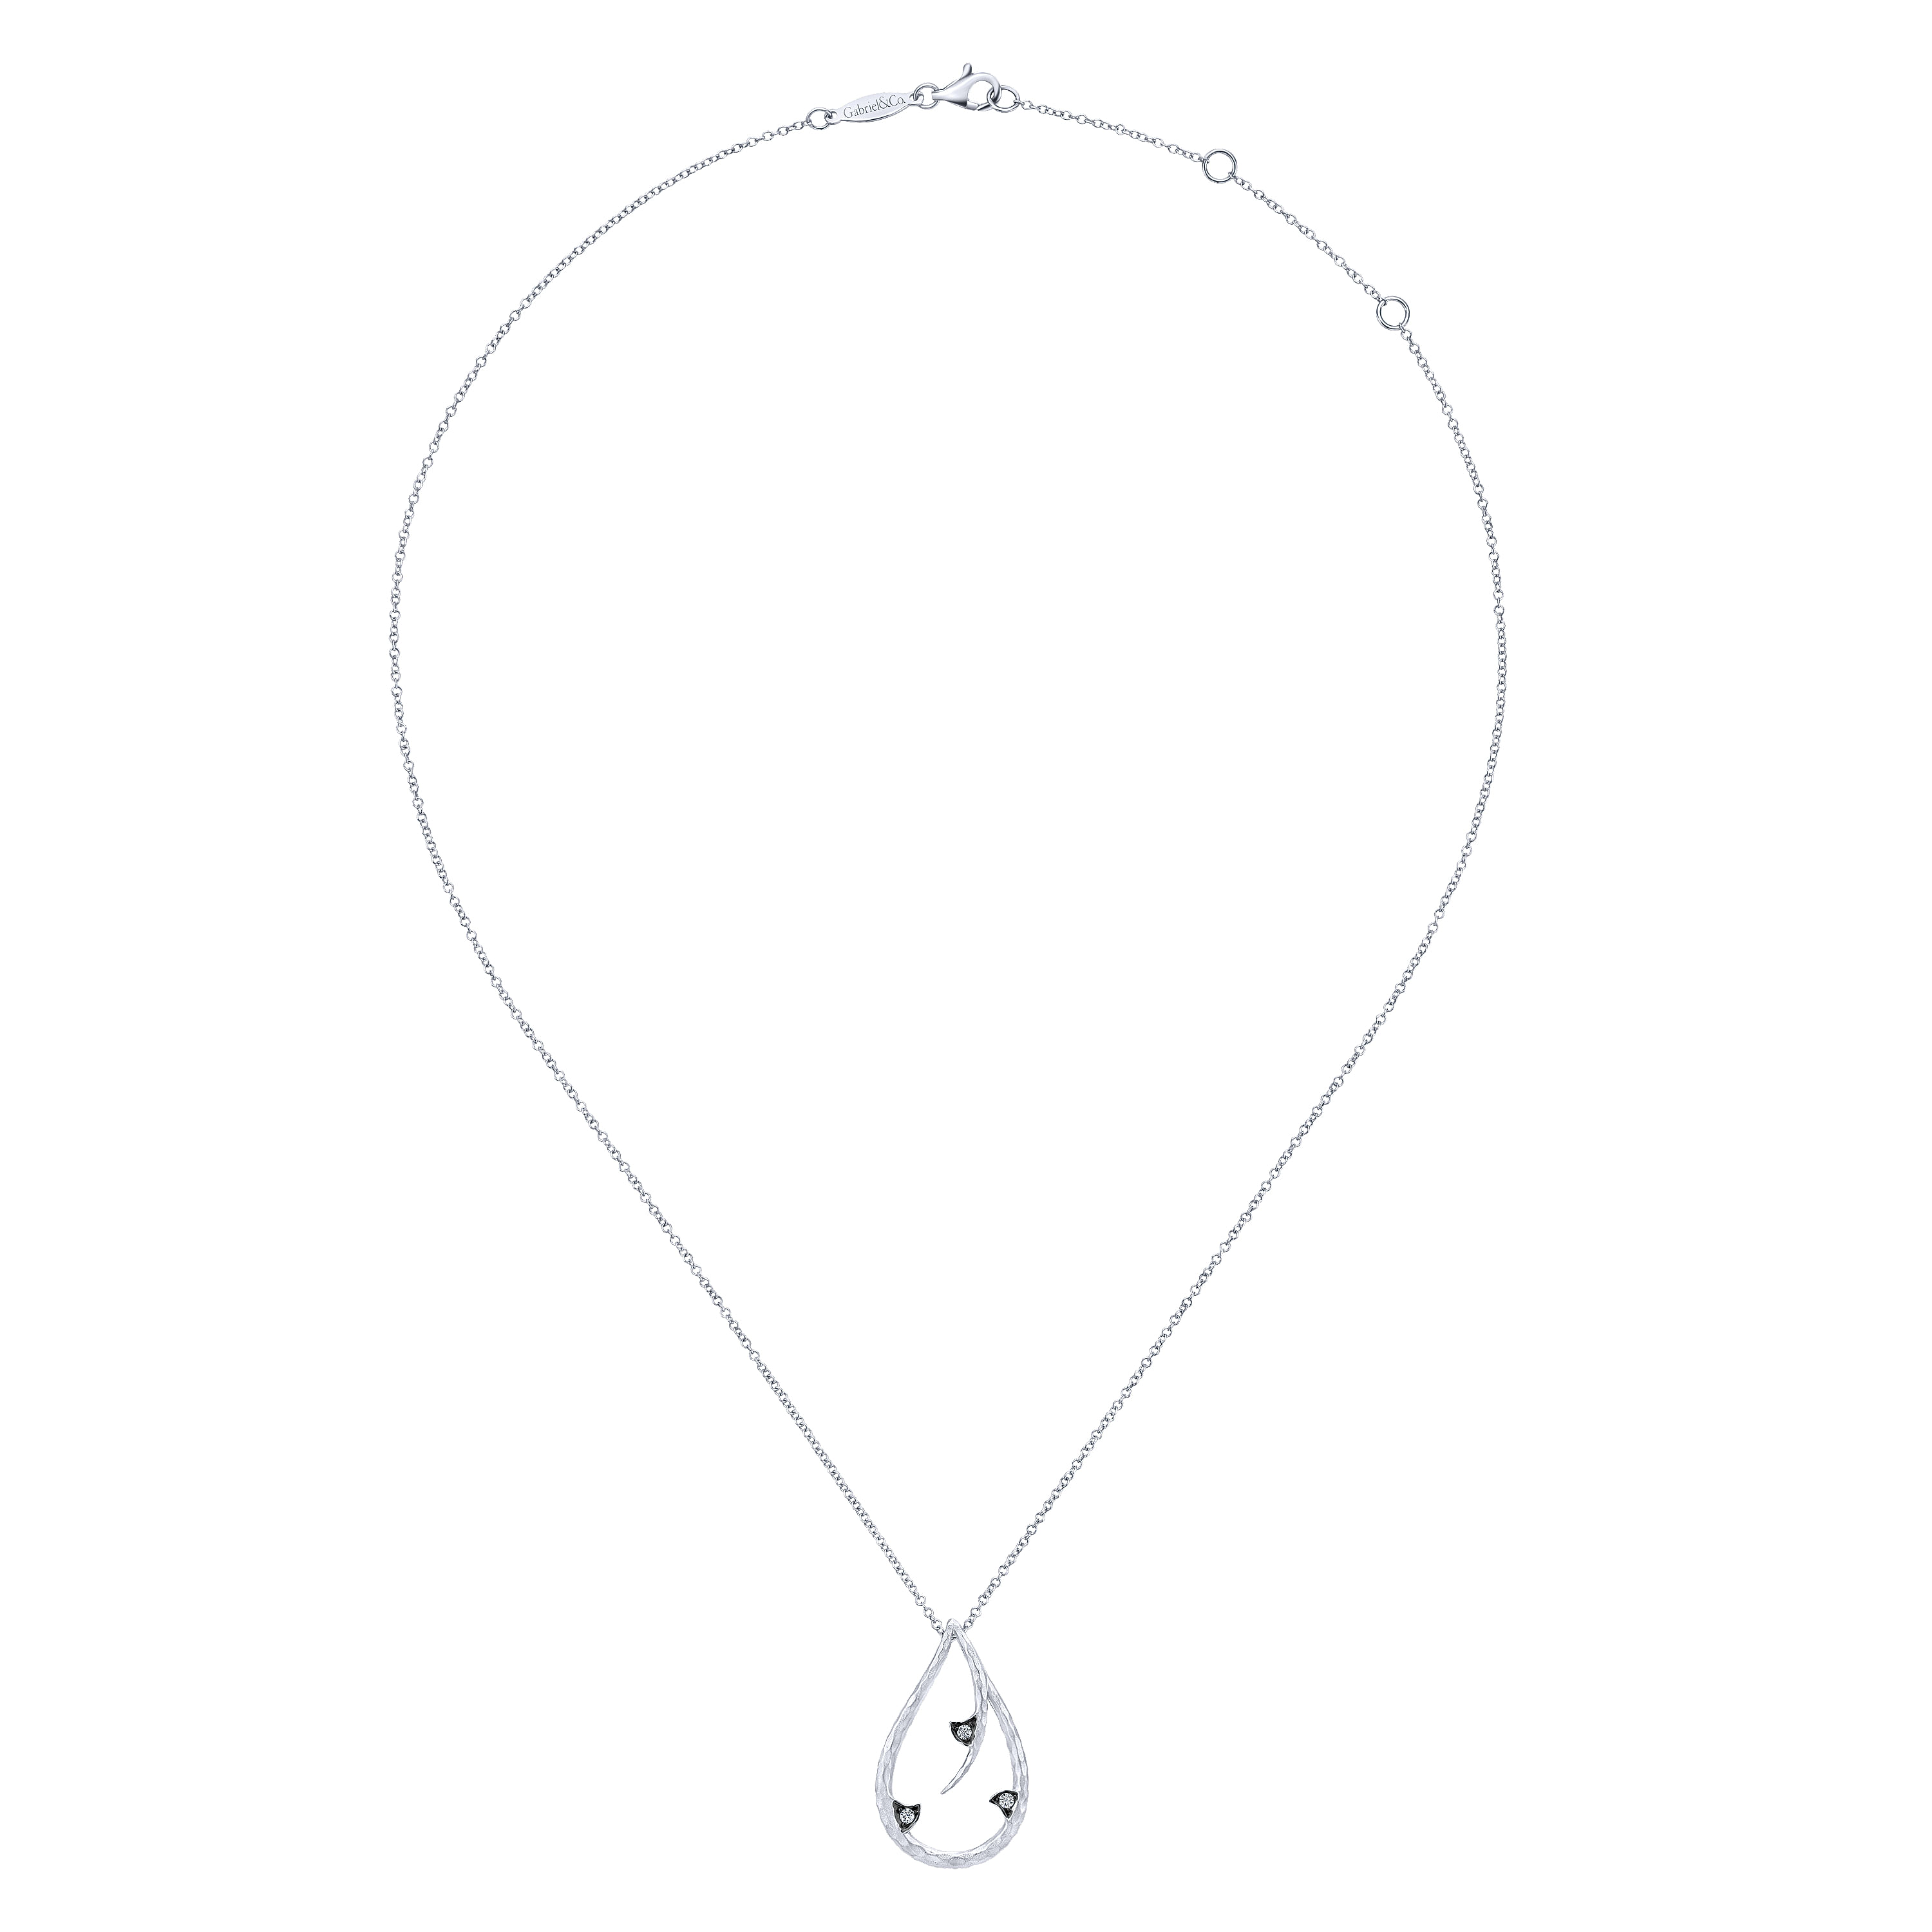 925 Sterling Silver Teardrop Pendant Necklace with White Sapphire